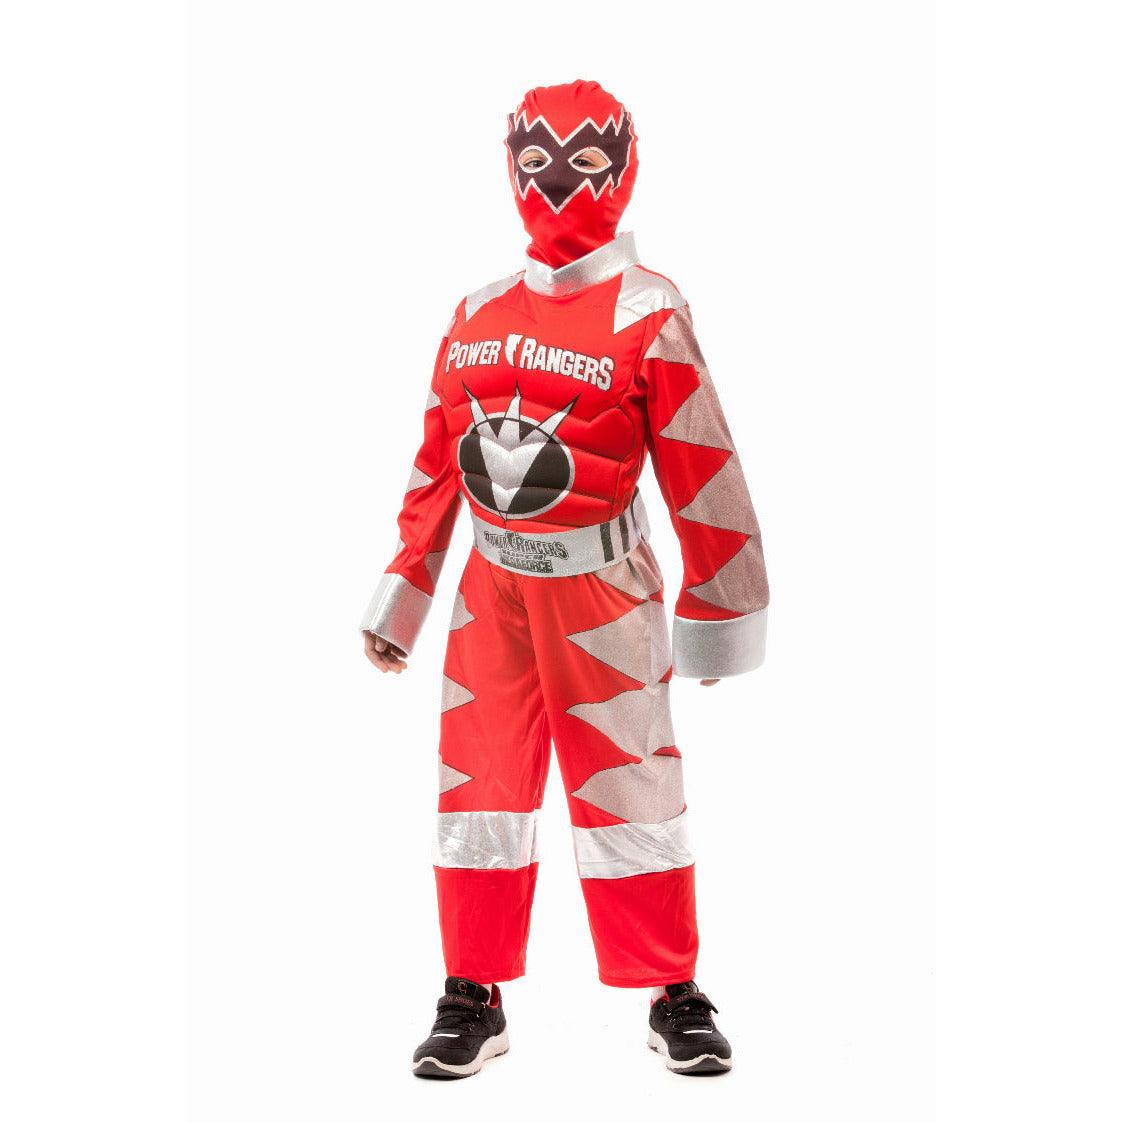 Power Ranger Costume - Red - Ourkids - M&amp;A